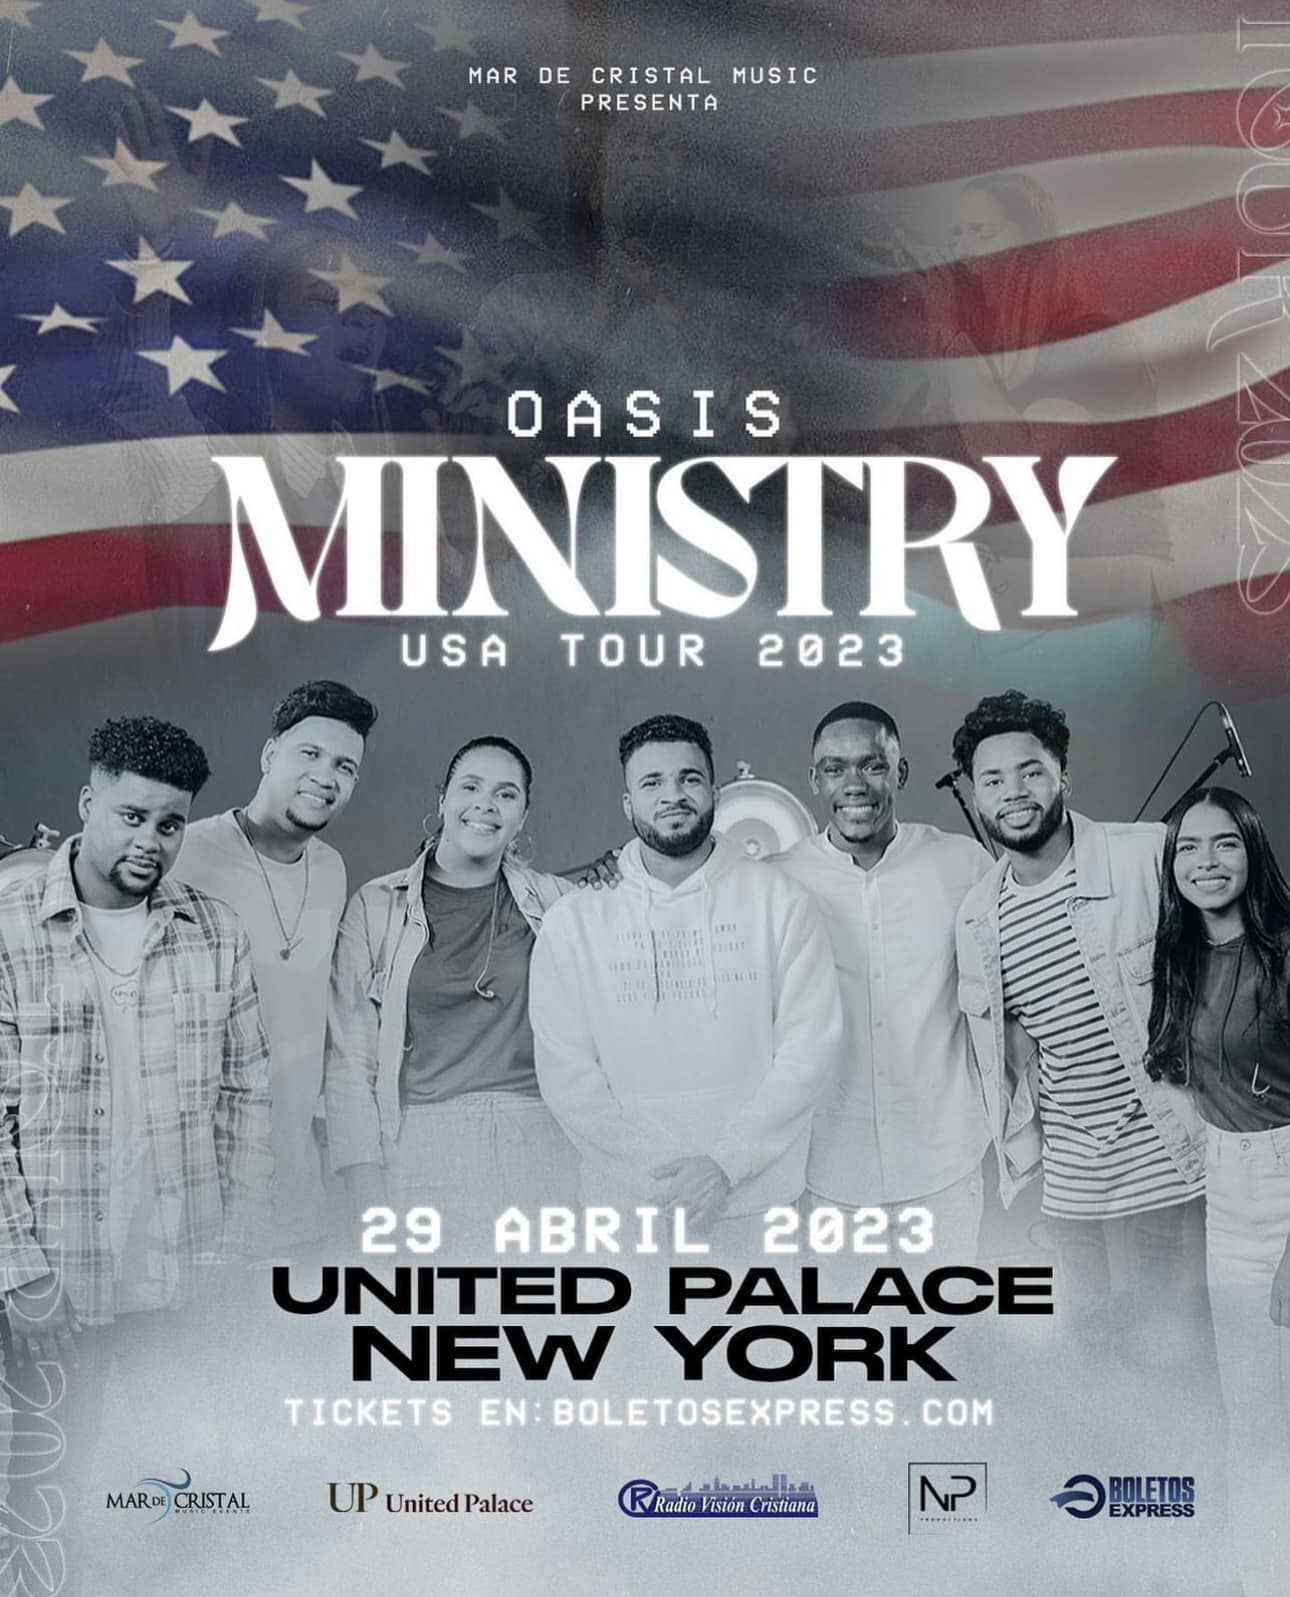 OASIS MINISTRY